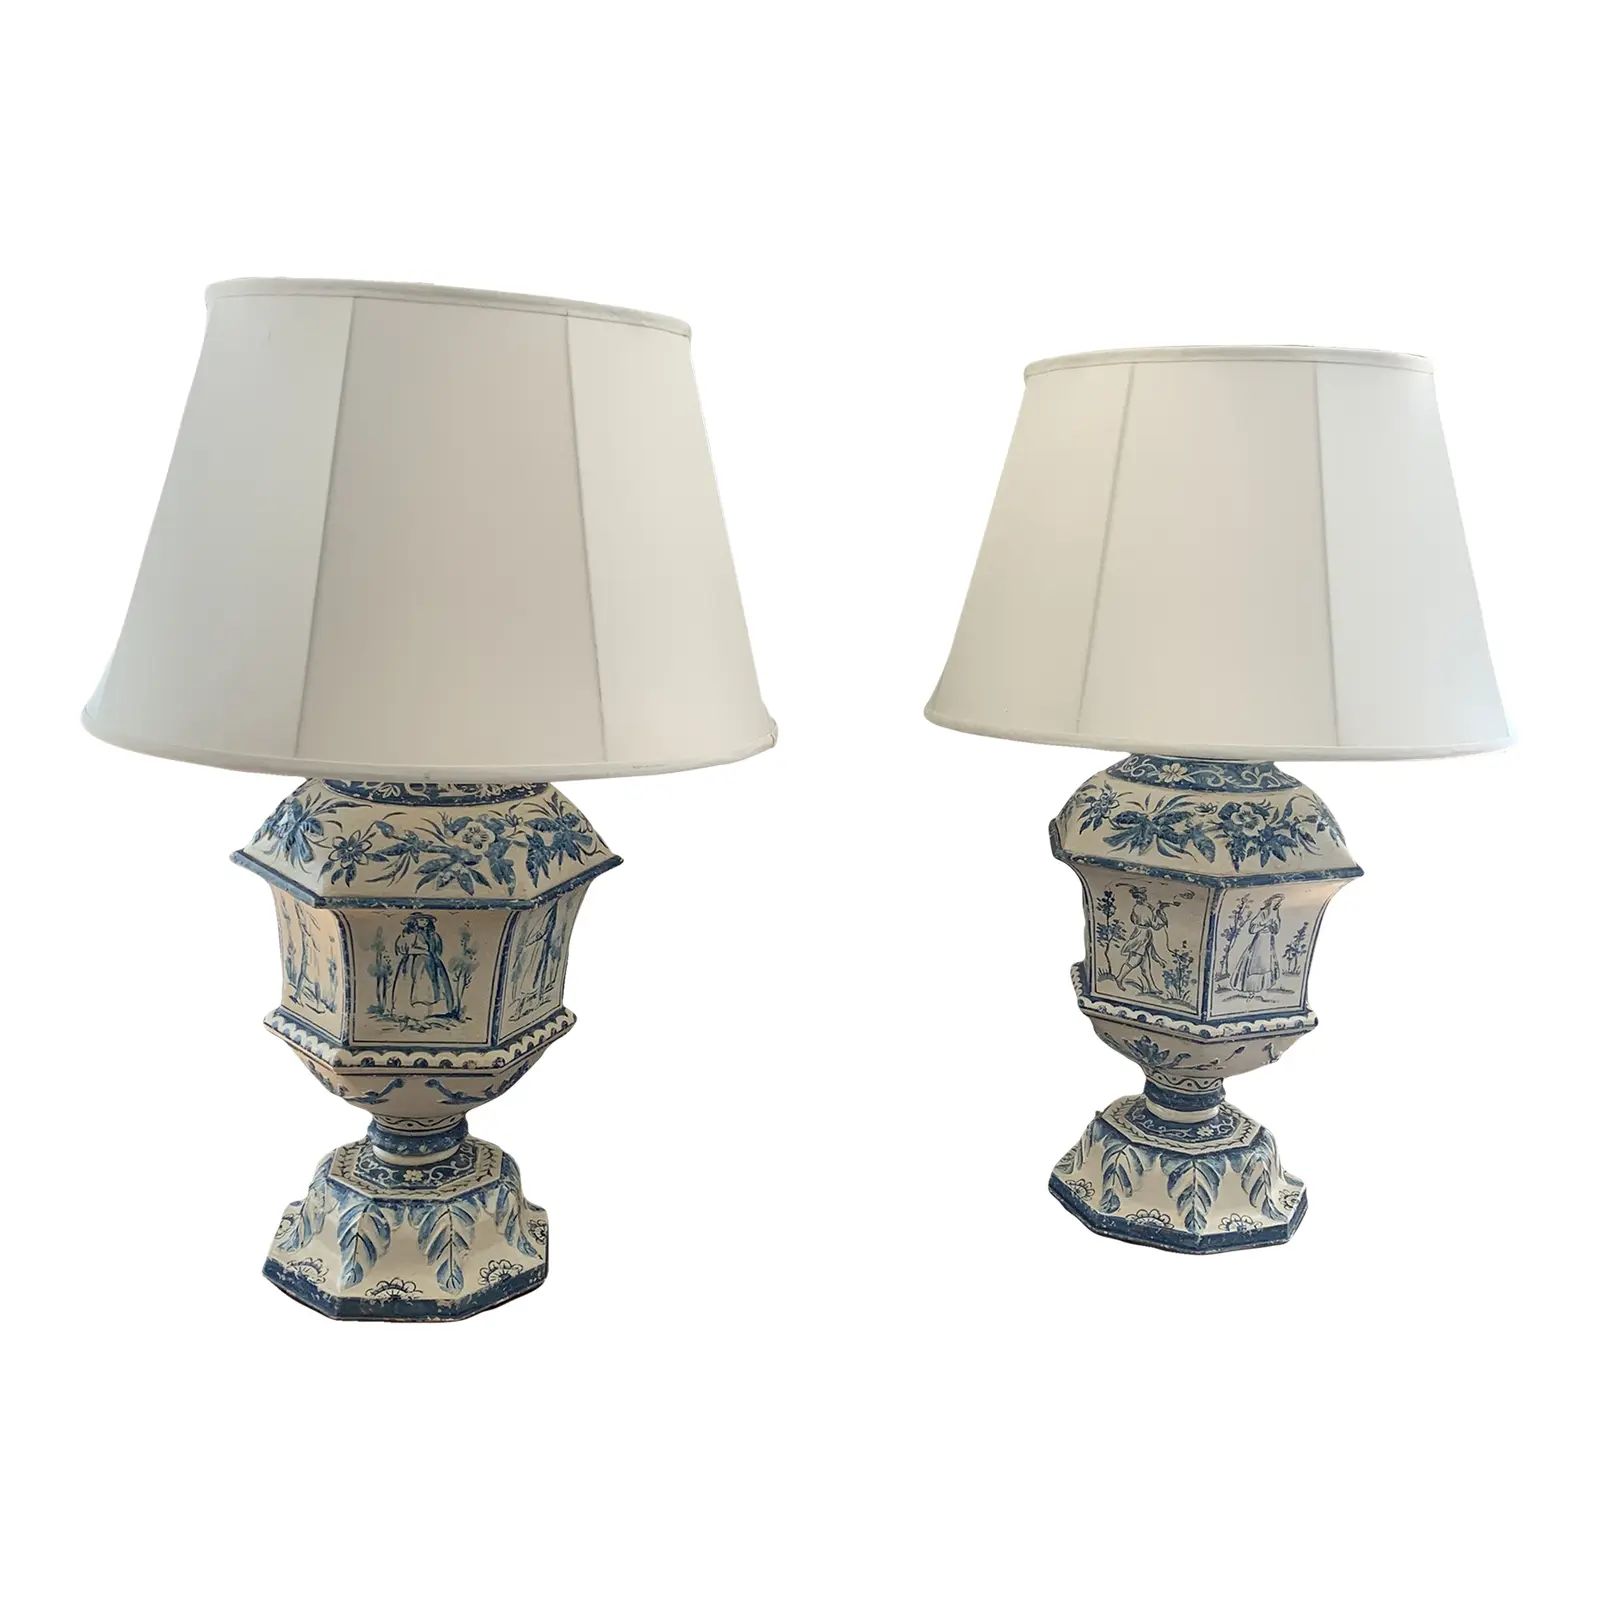 Antique Handpainted Blue and White Delft Style Tole Lamps With Shades- a Pair | Chairish